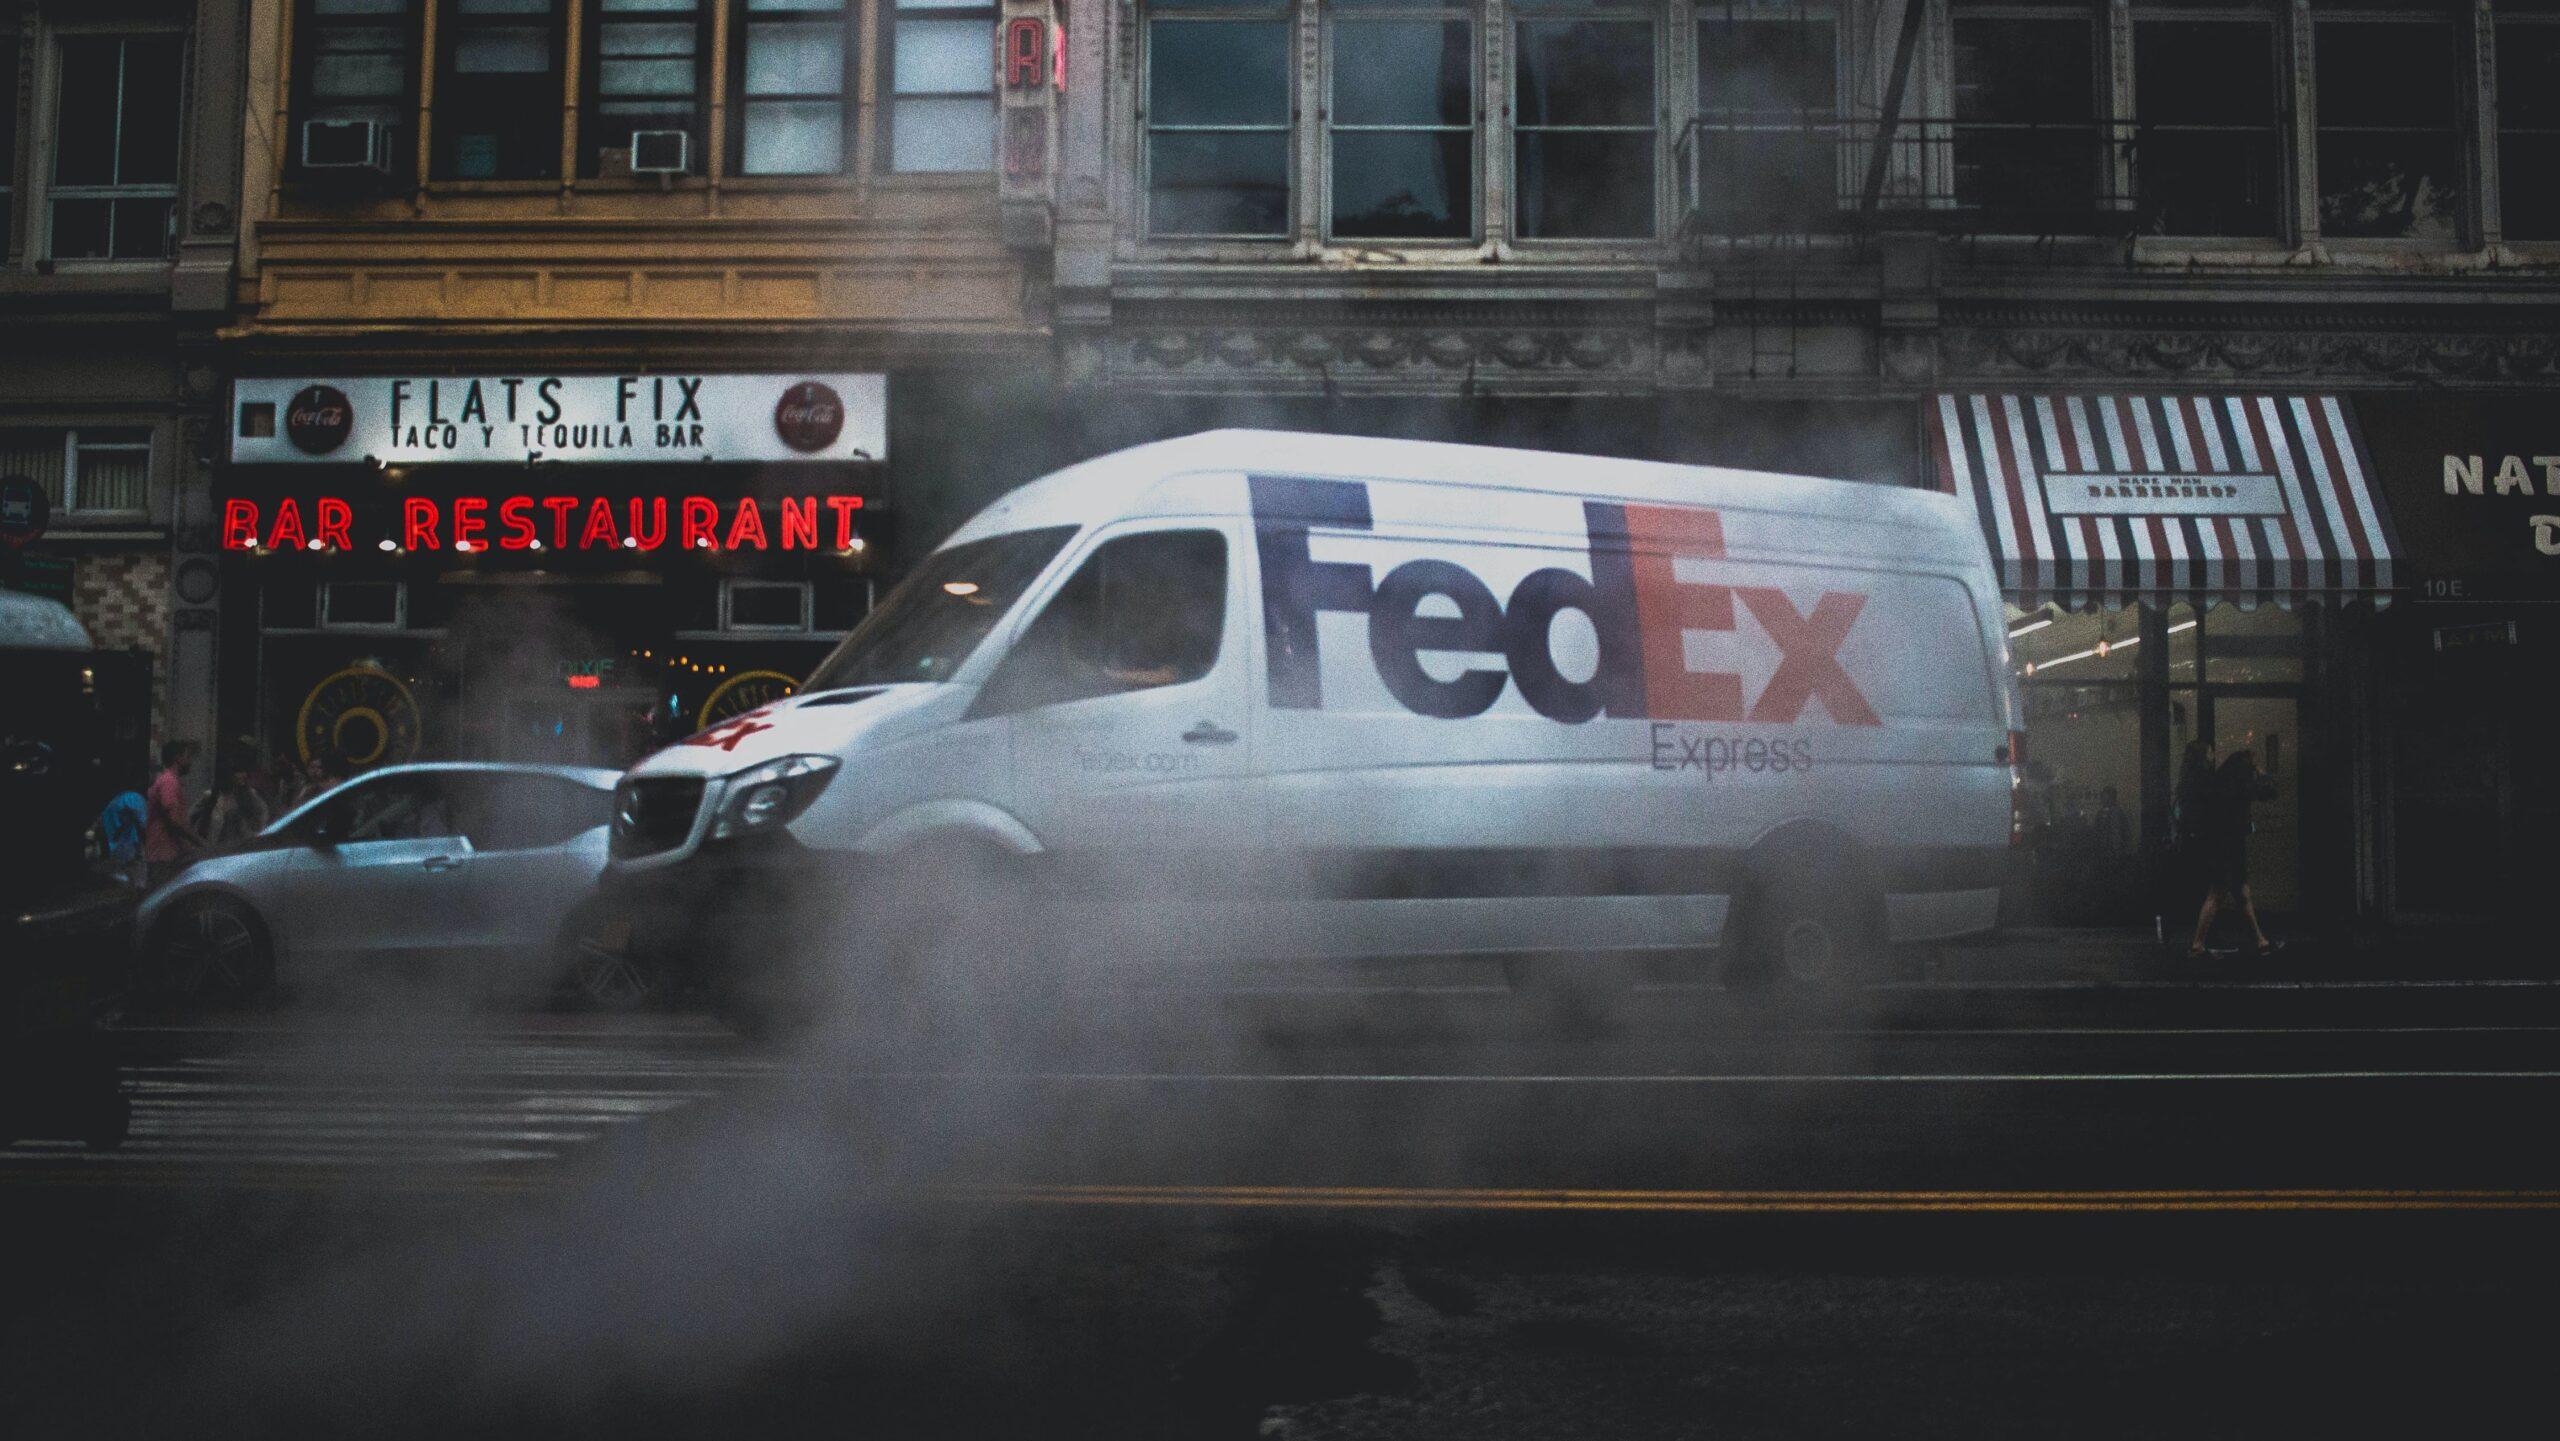 A FedEx van pictured in front of a taco bar and restaurant.